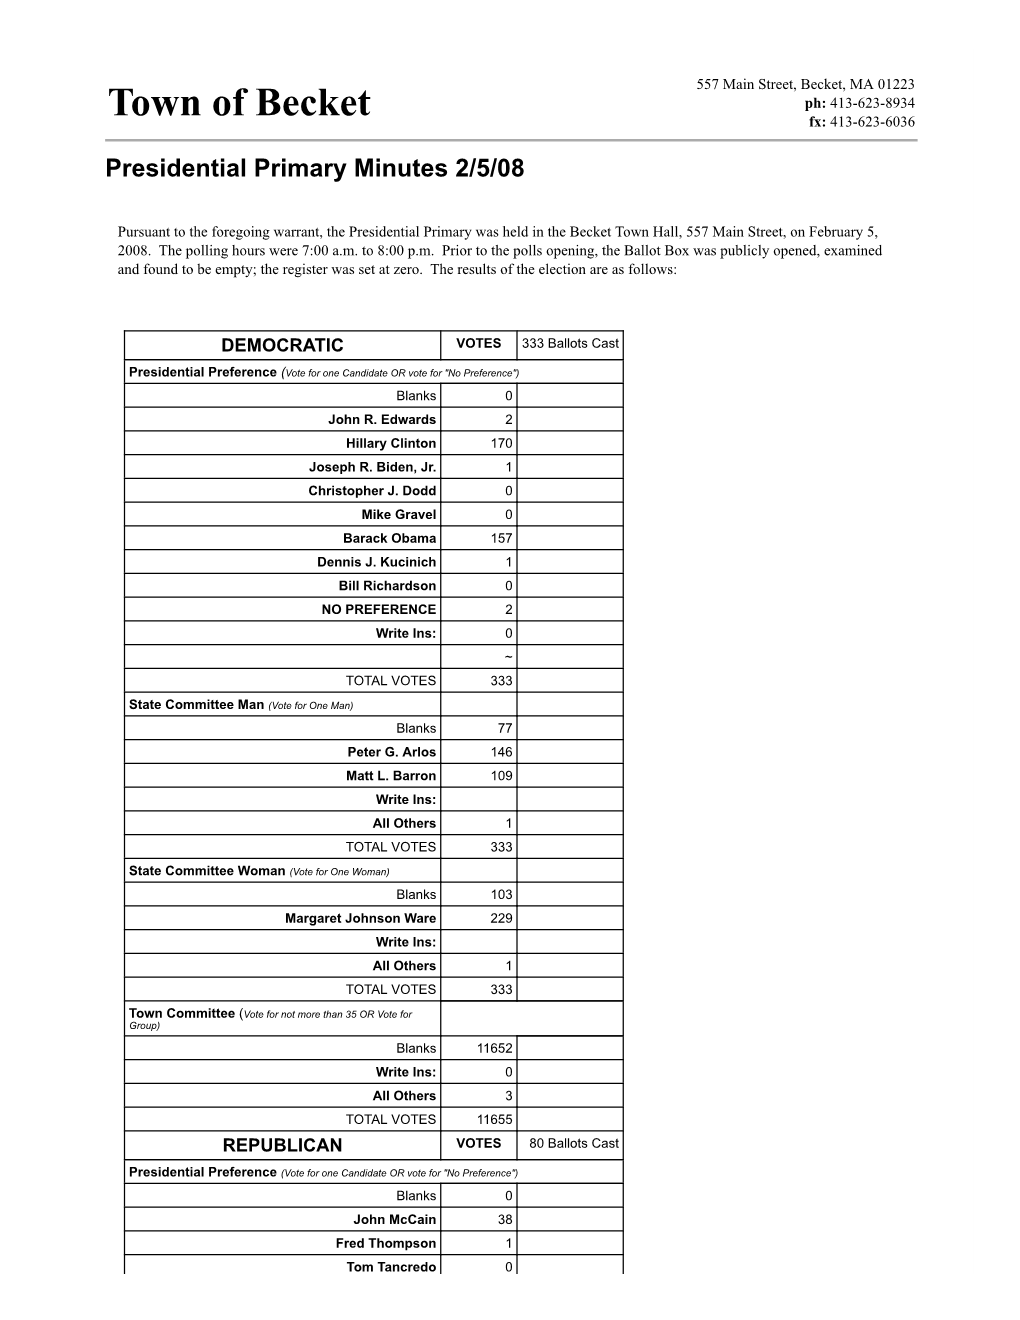 Presidential Primary Minutes 02/05/2008